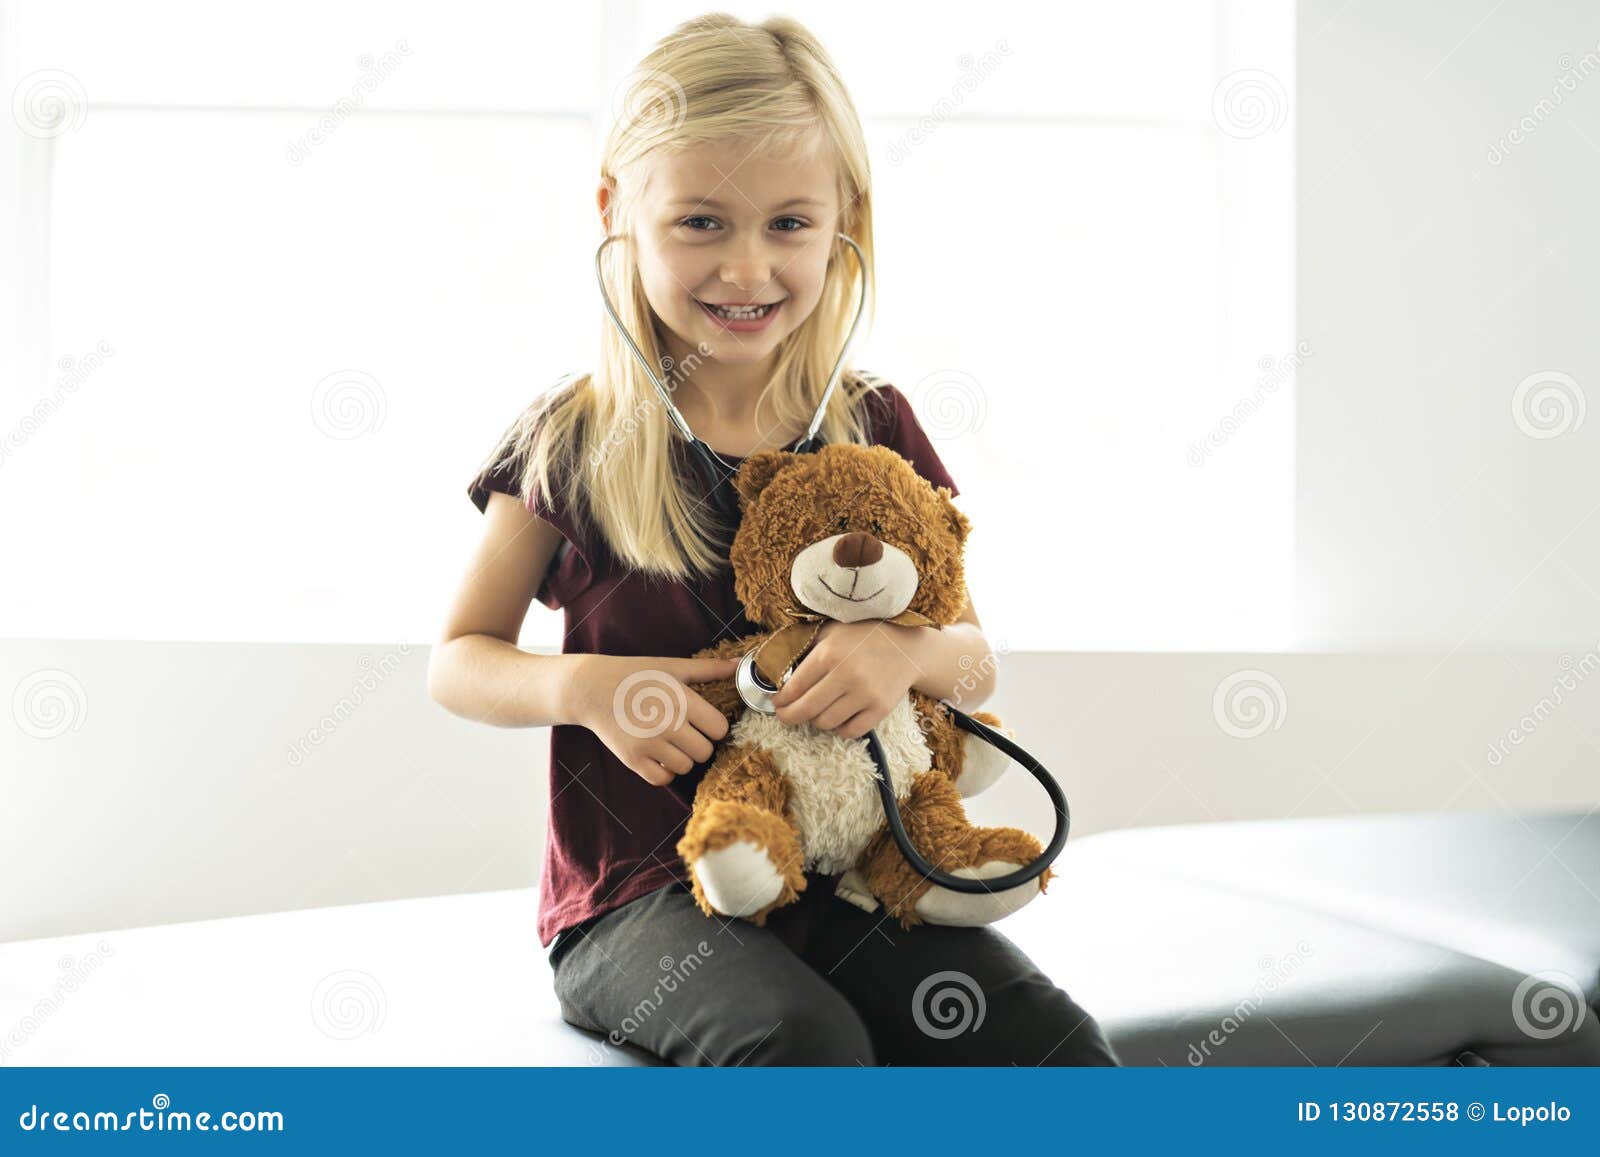 a doctor girl playing and cure bear at the pediatric